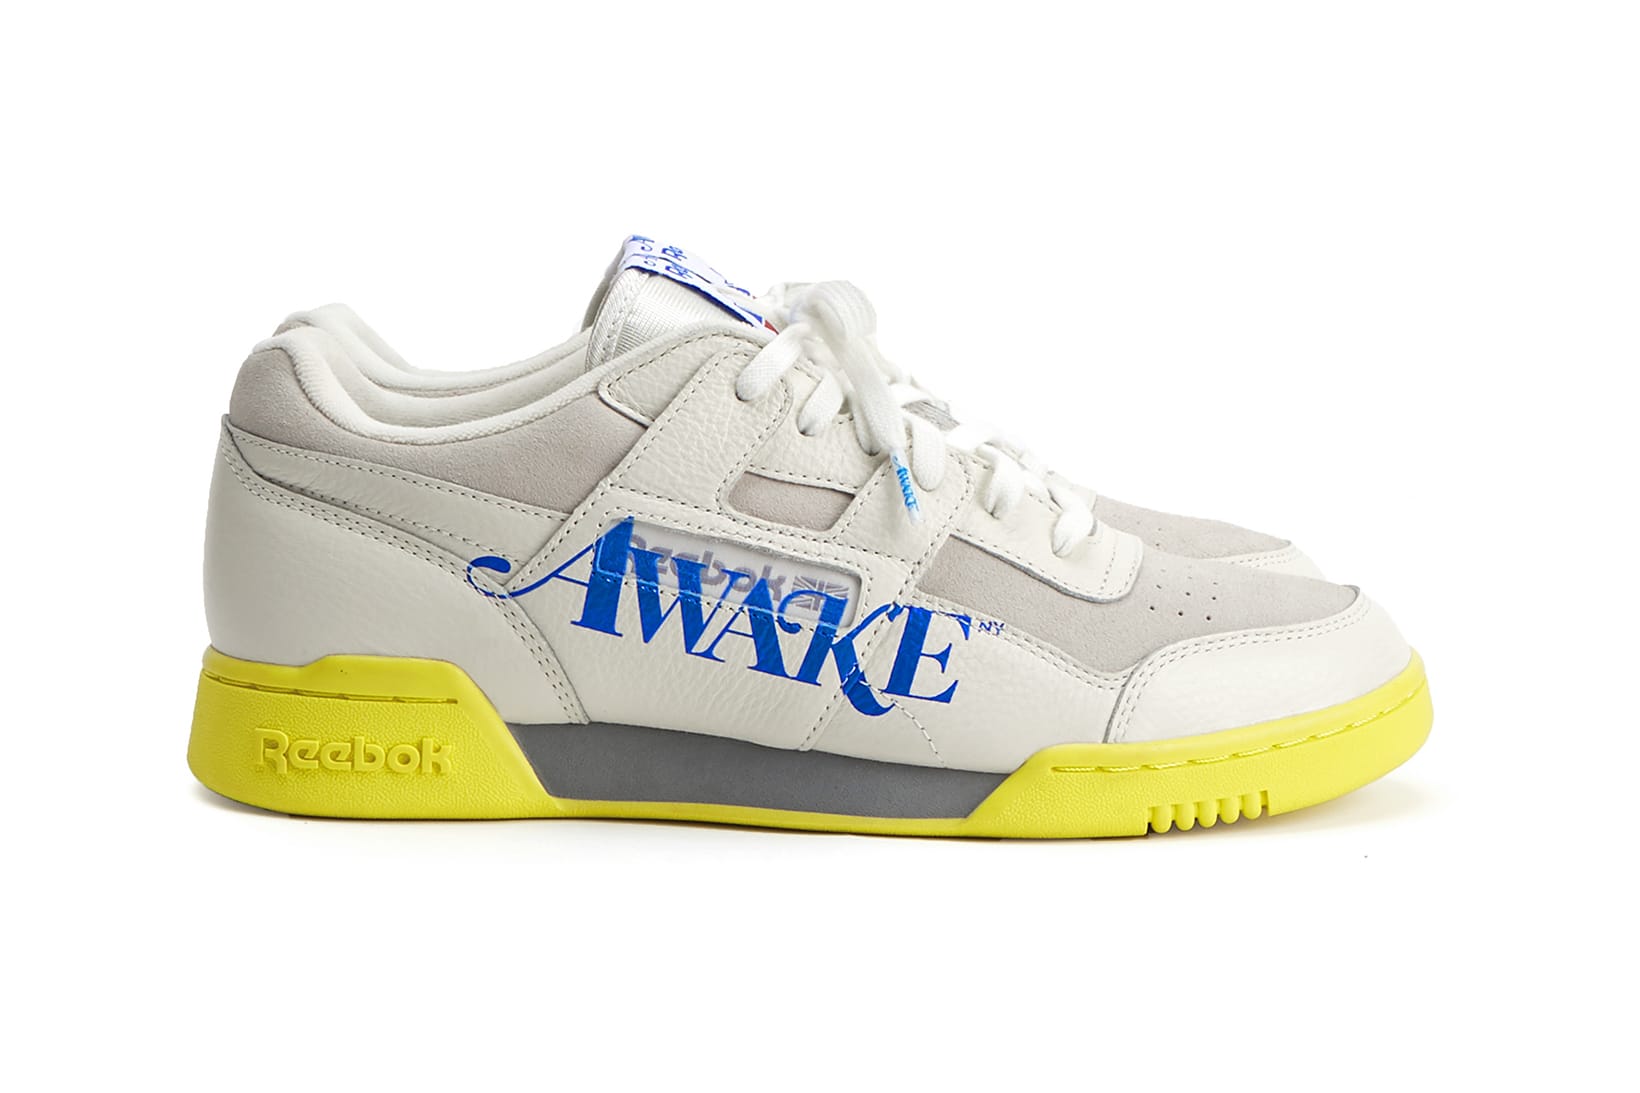 Selling - reebok new york - OFF 78% - Free shipping - janome.co.com!